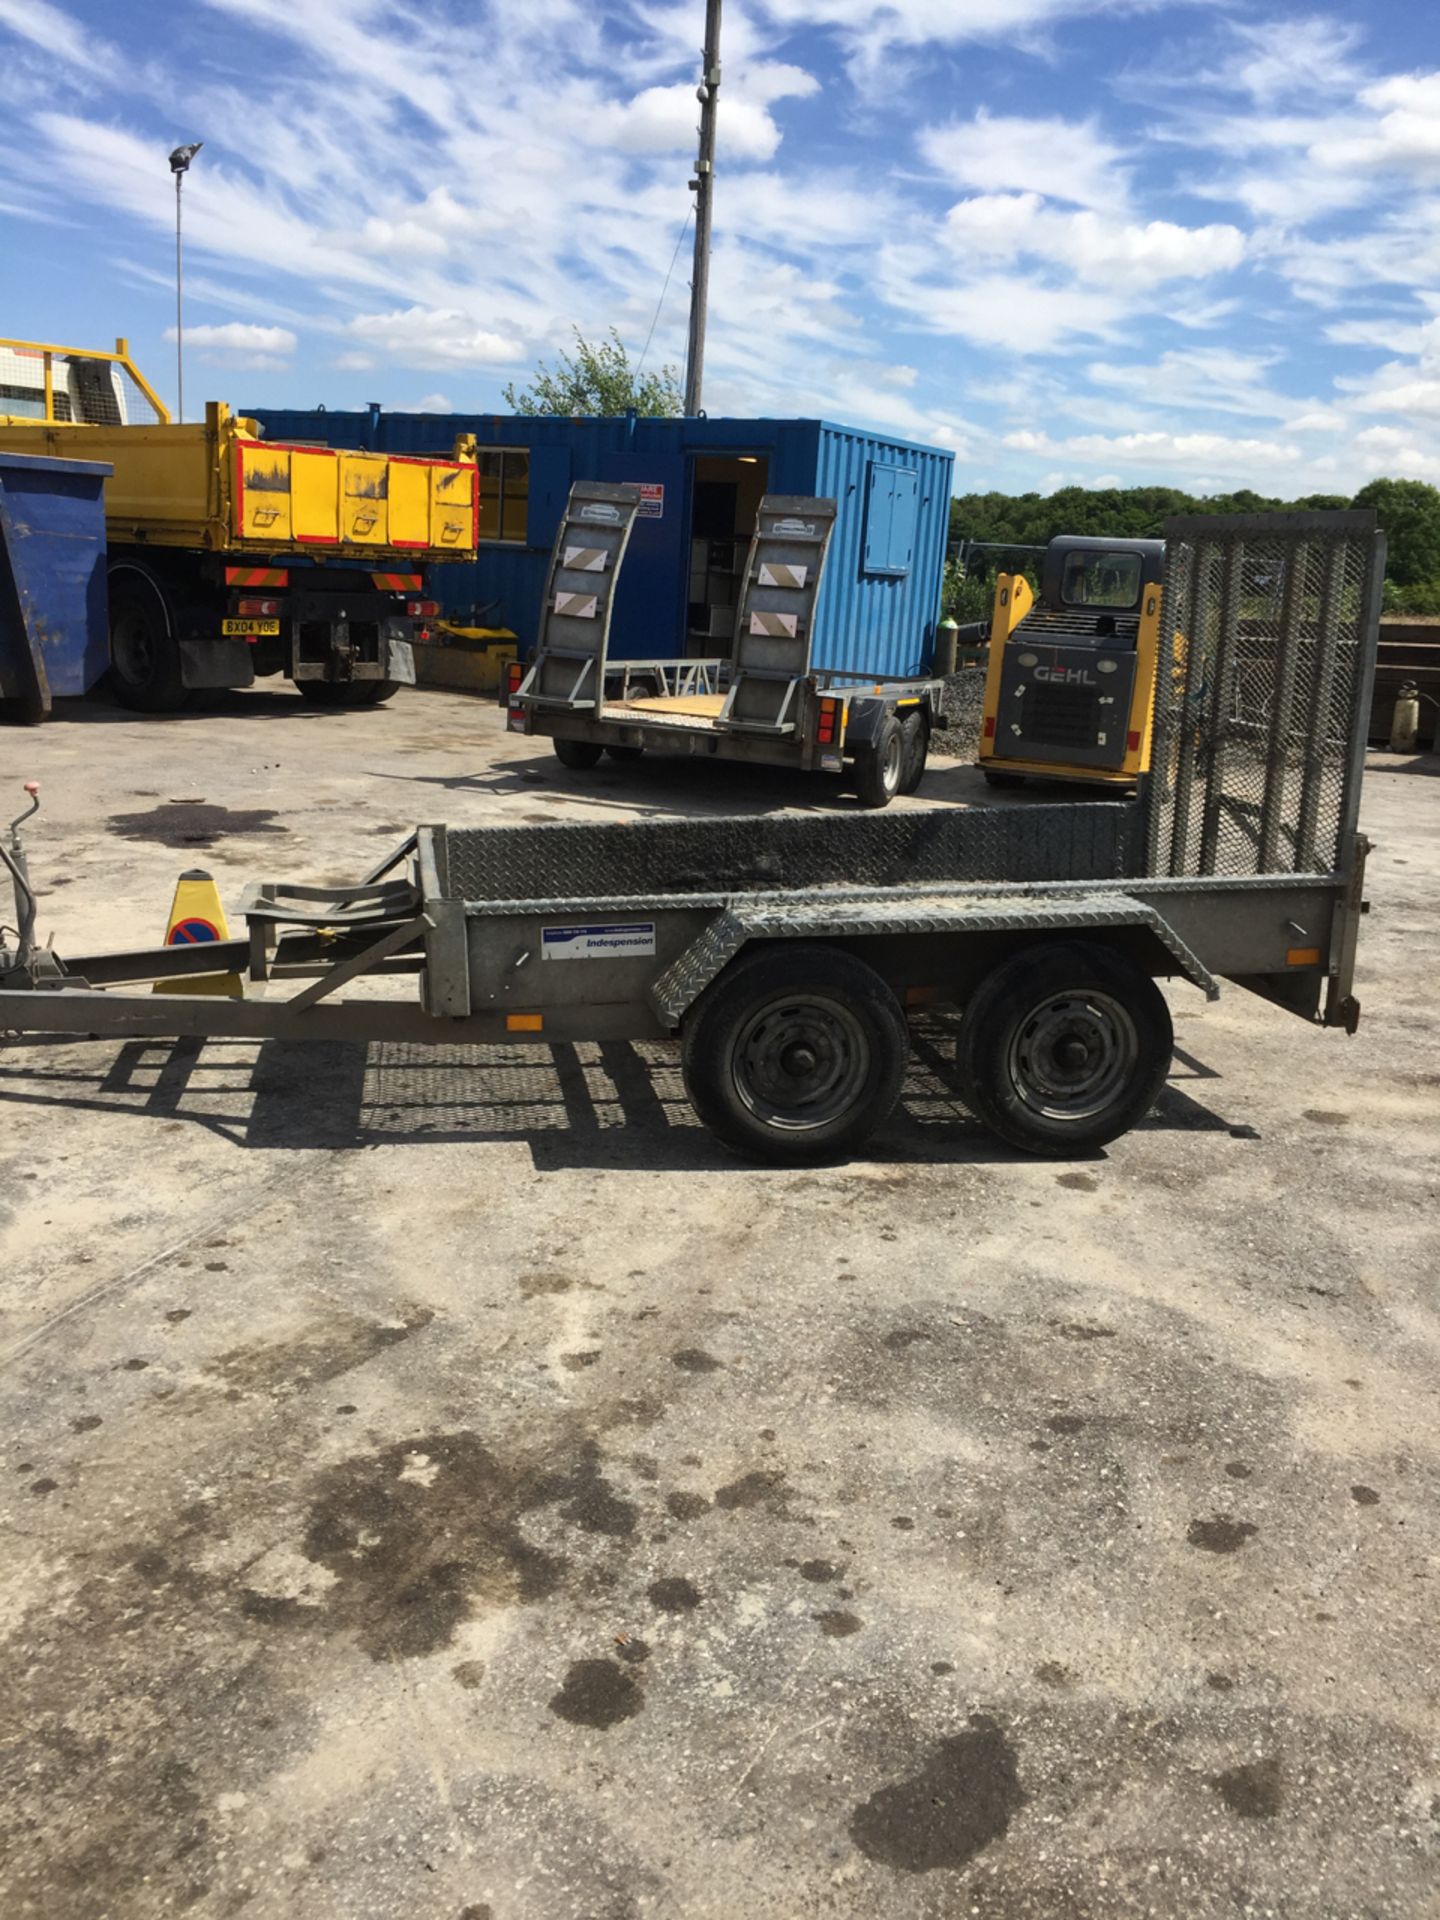 1.5t plant trailer by Indespension.